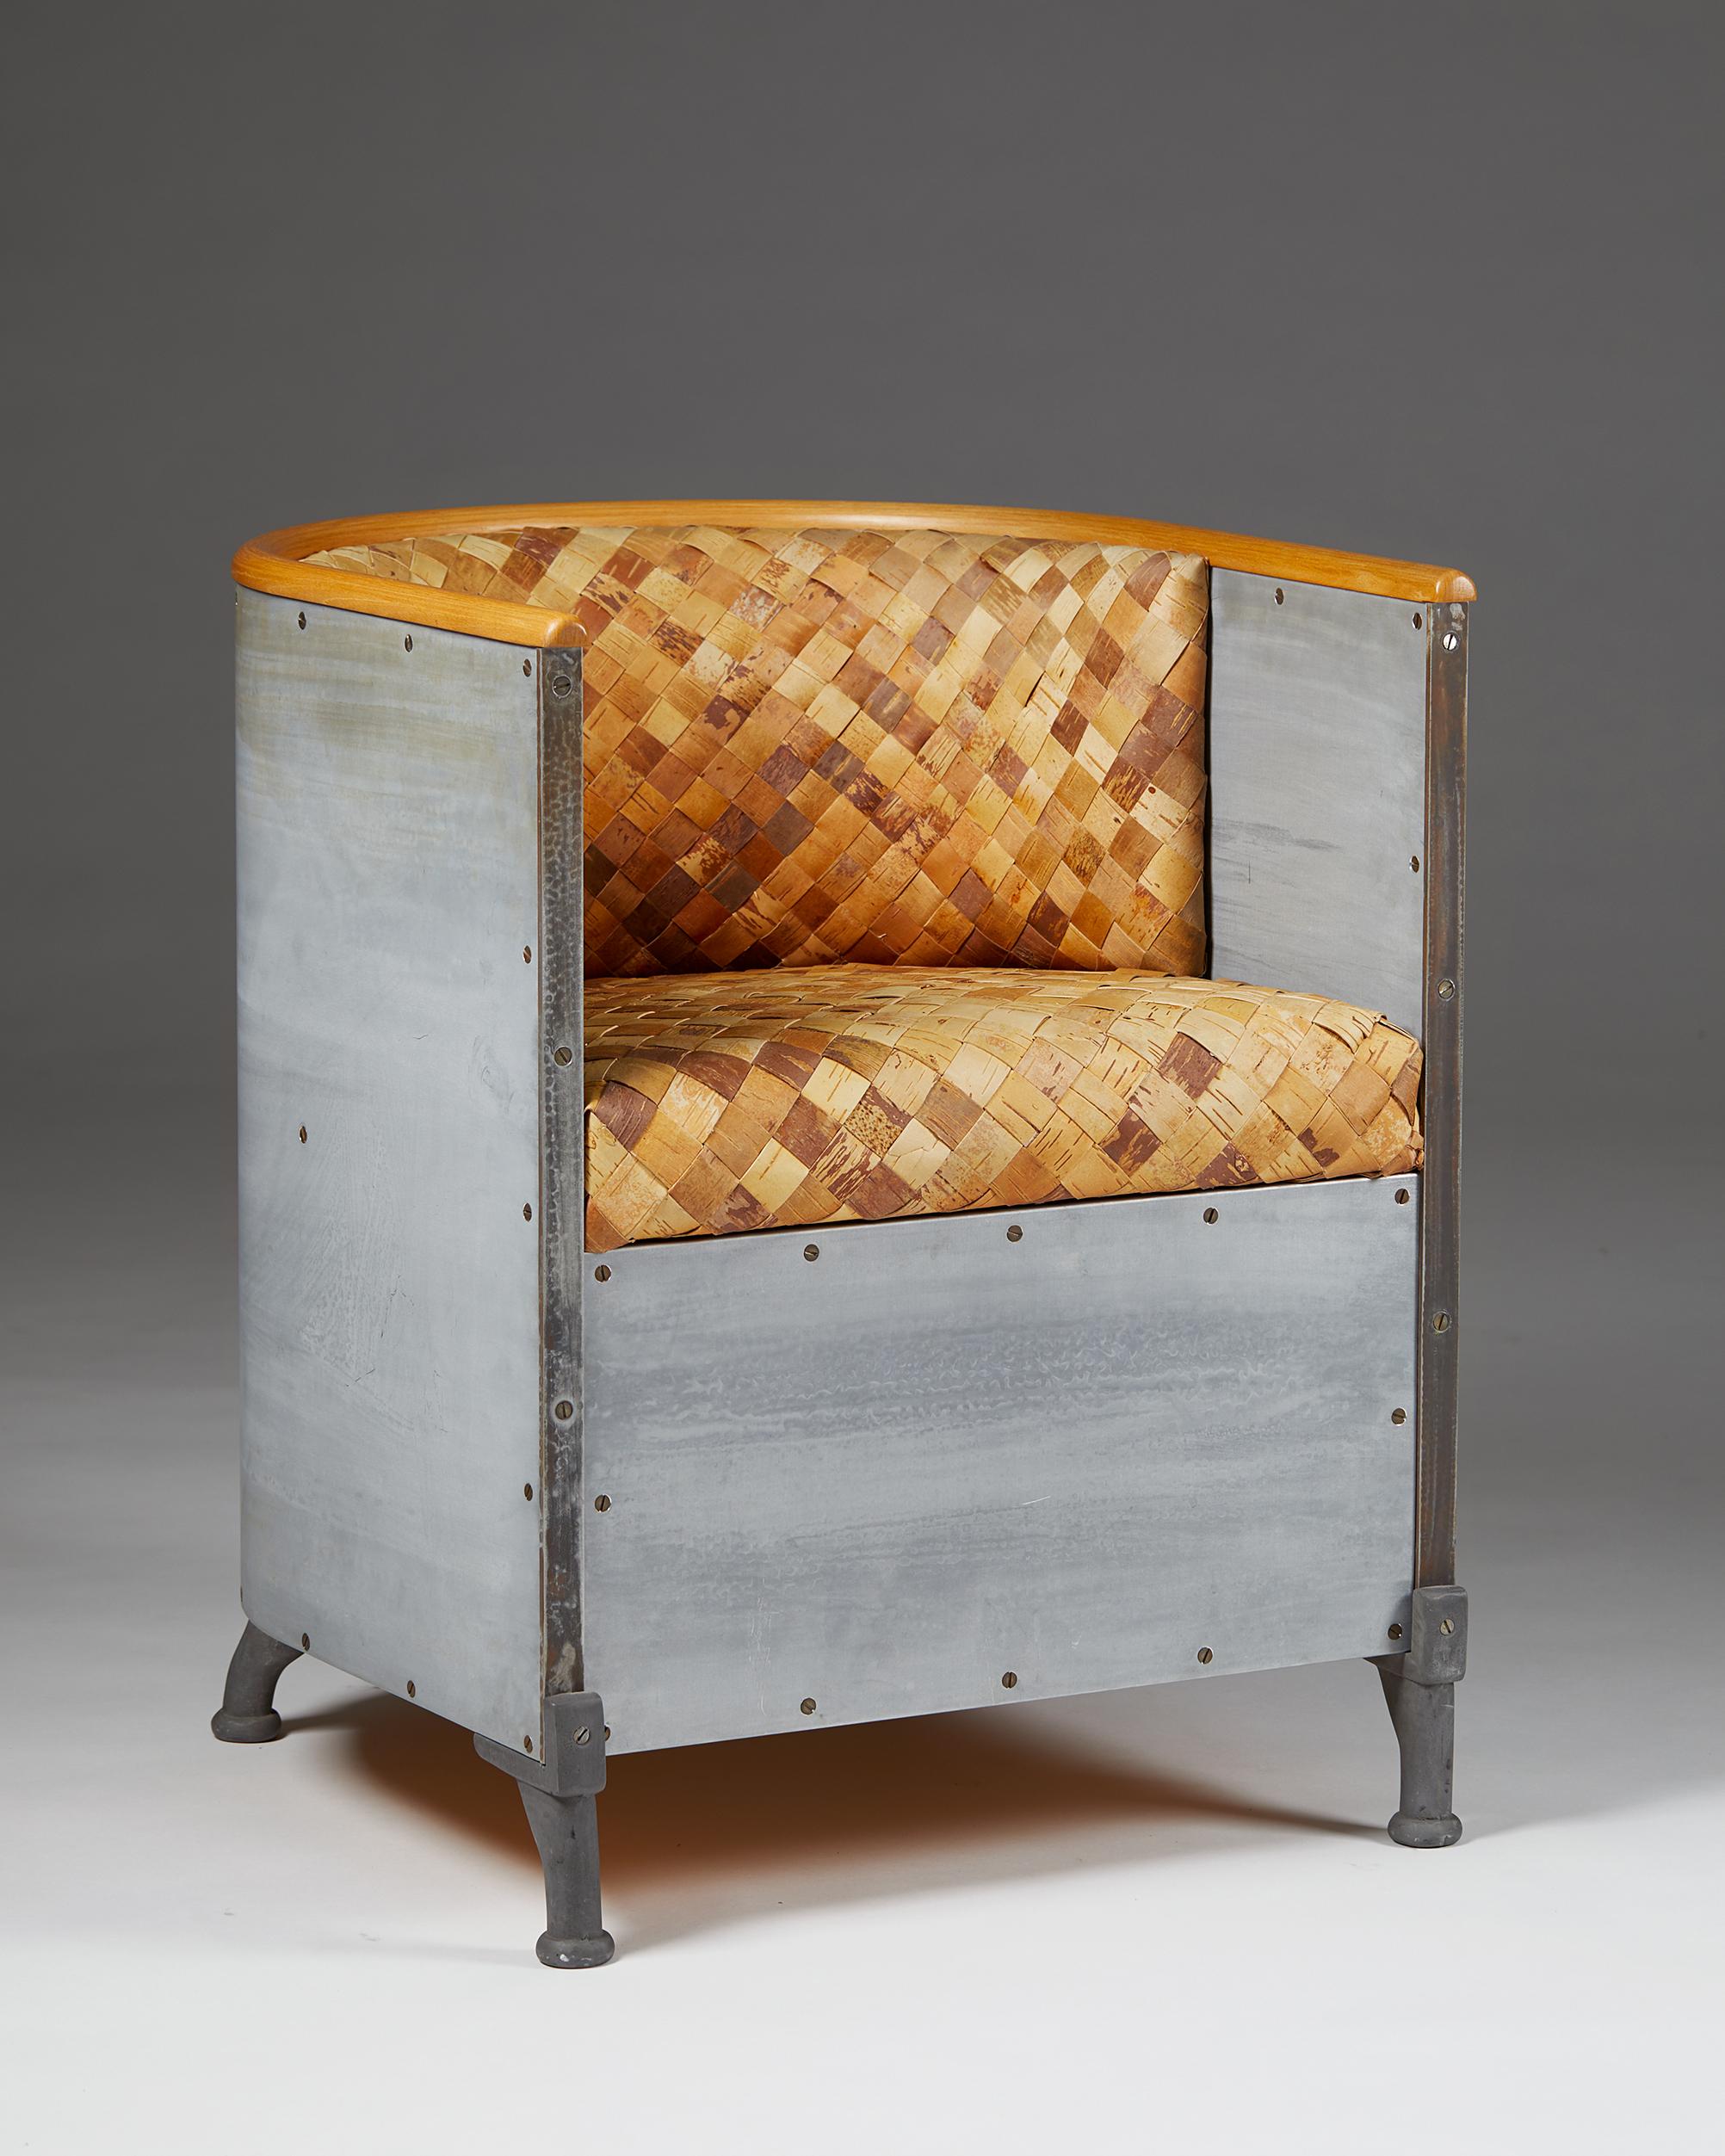 Armchair ‘Aluminiumfåtölj’ model 34-50/200 designed by Mats Theselius for Källemo,
Sweden, 1990.

Aluminium and birch bark.

50 examples of this chair model were made in birch bark, and the rest in leather.

This example is marked one of the fifty